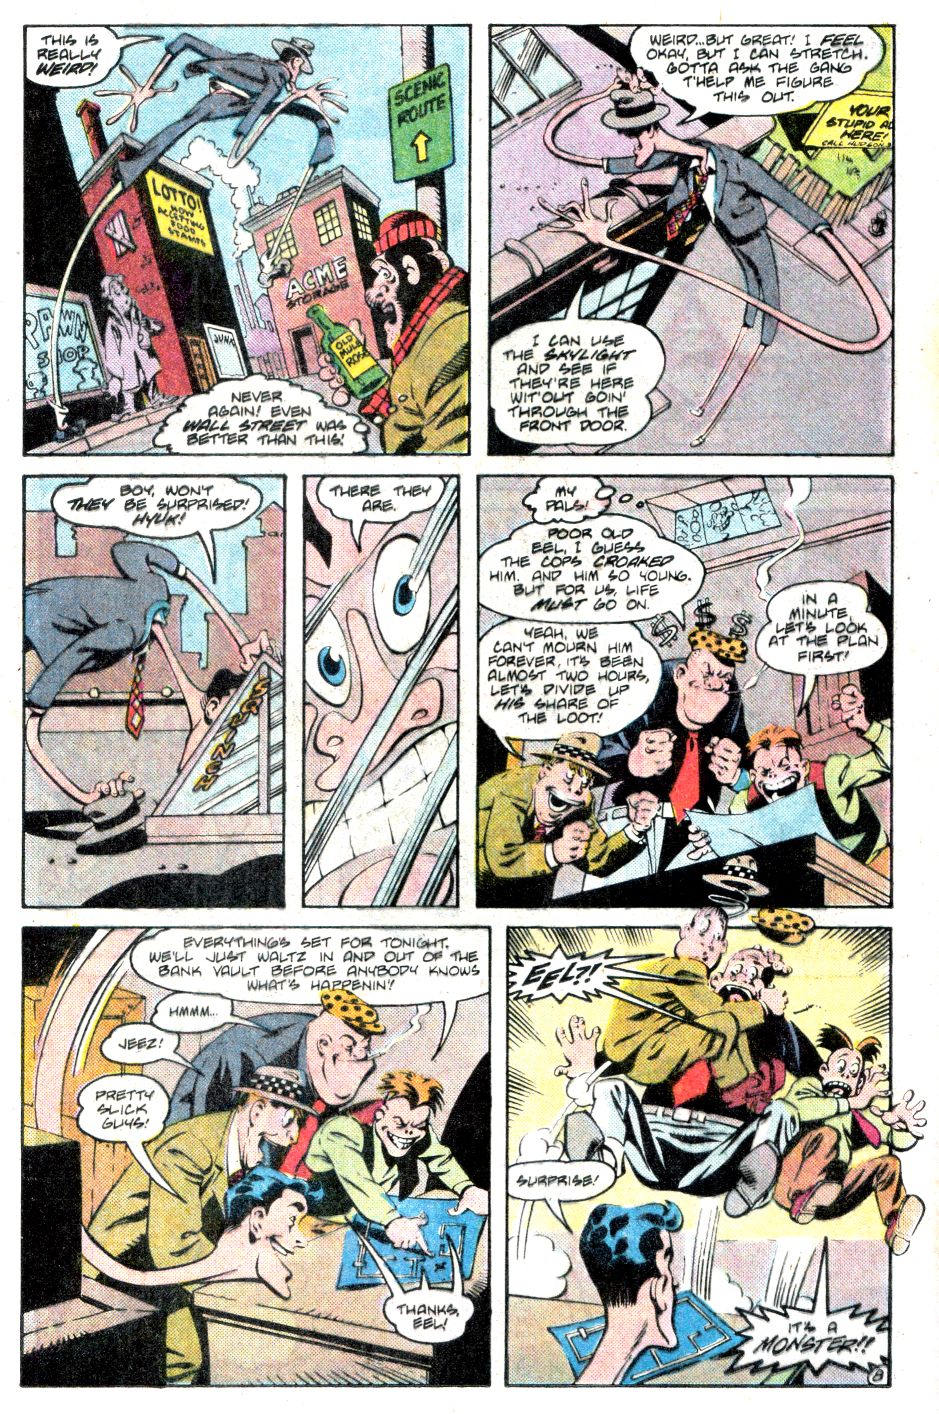 Plastic Man (1988) issue 1 - Page 9